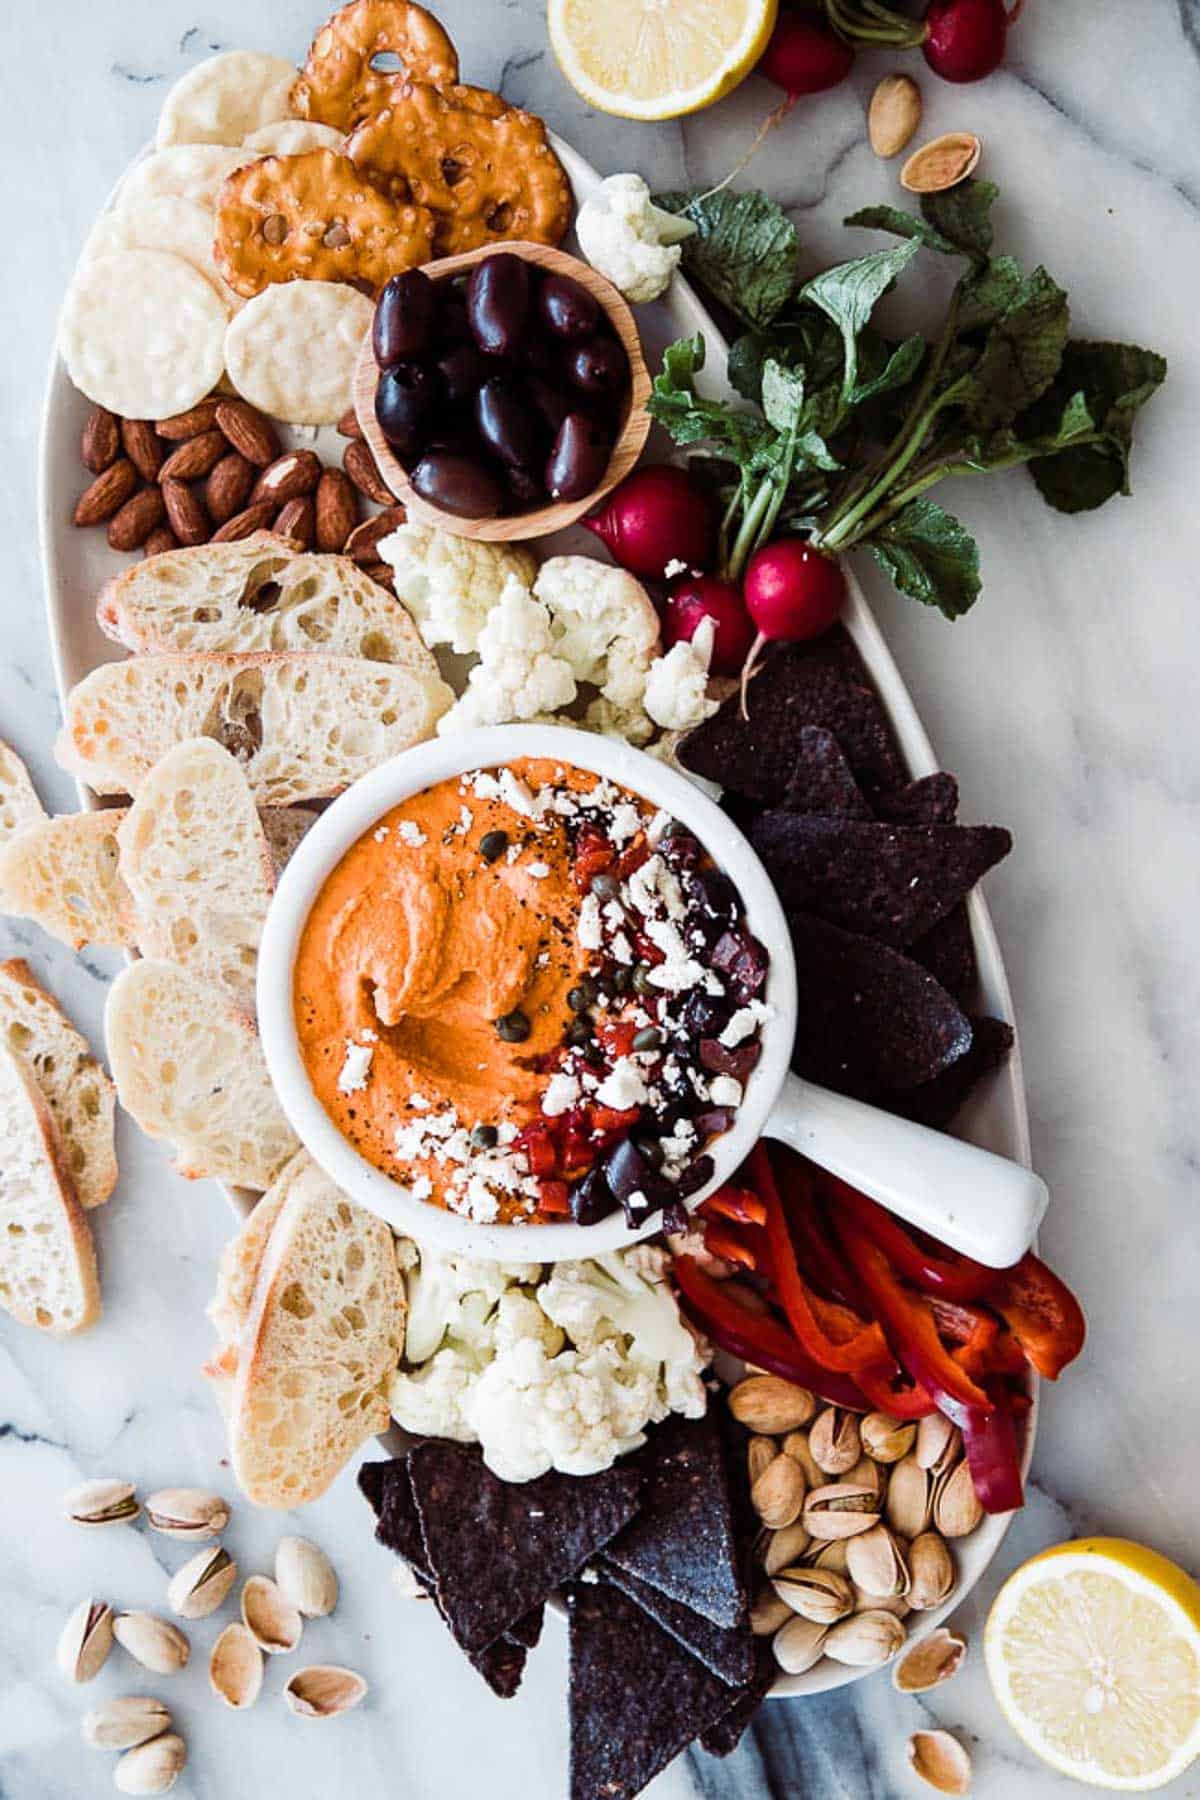 Roasted red pepper hummus on a platter surrounded by bread and veggies.